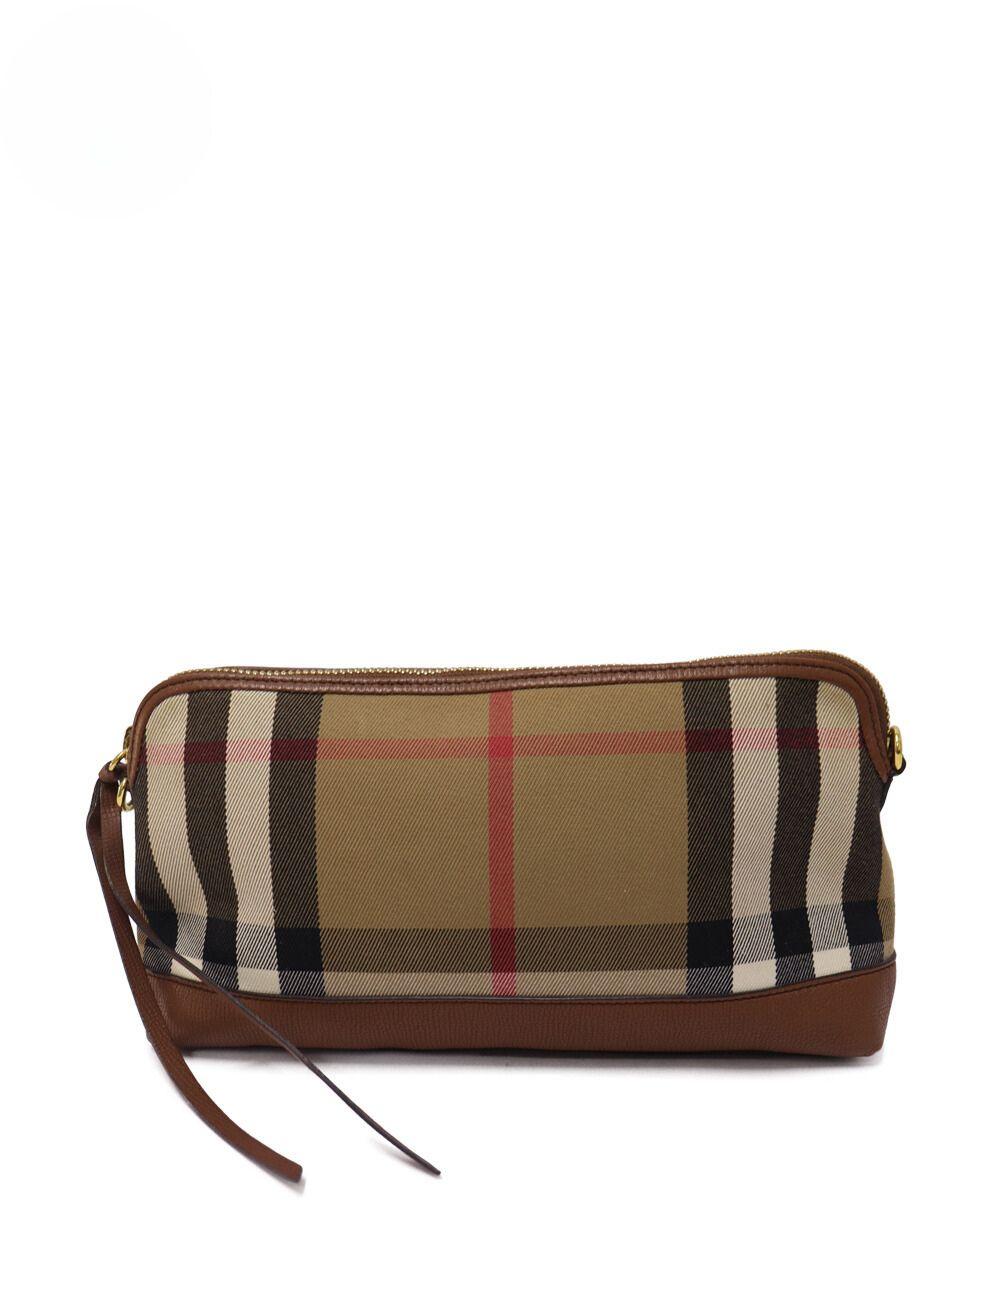 Women's Burberry House Check and Leather Tan Crossbody Bag 